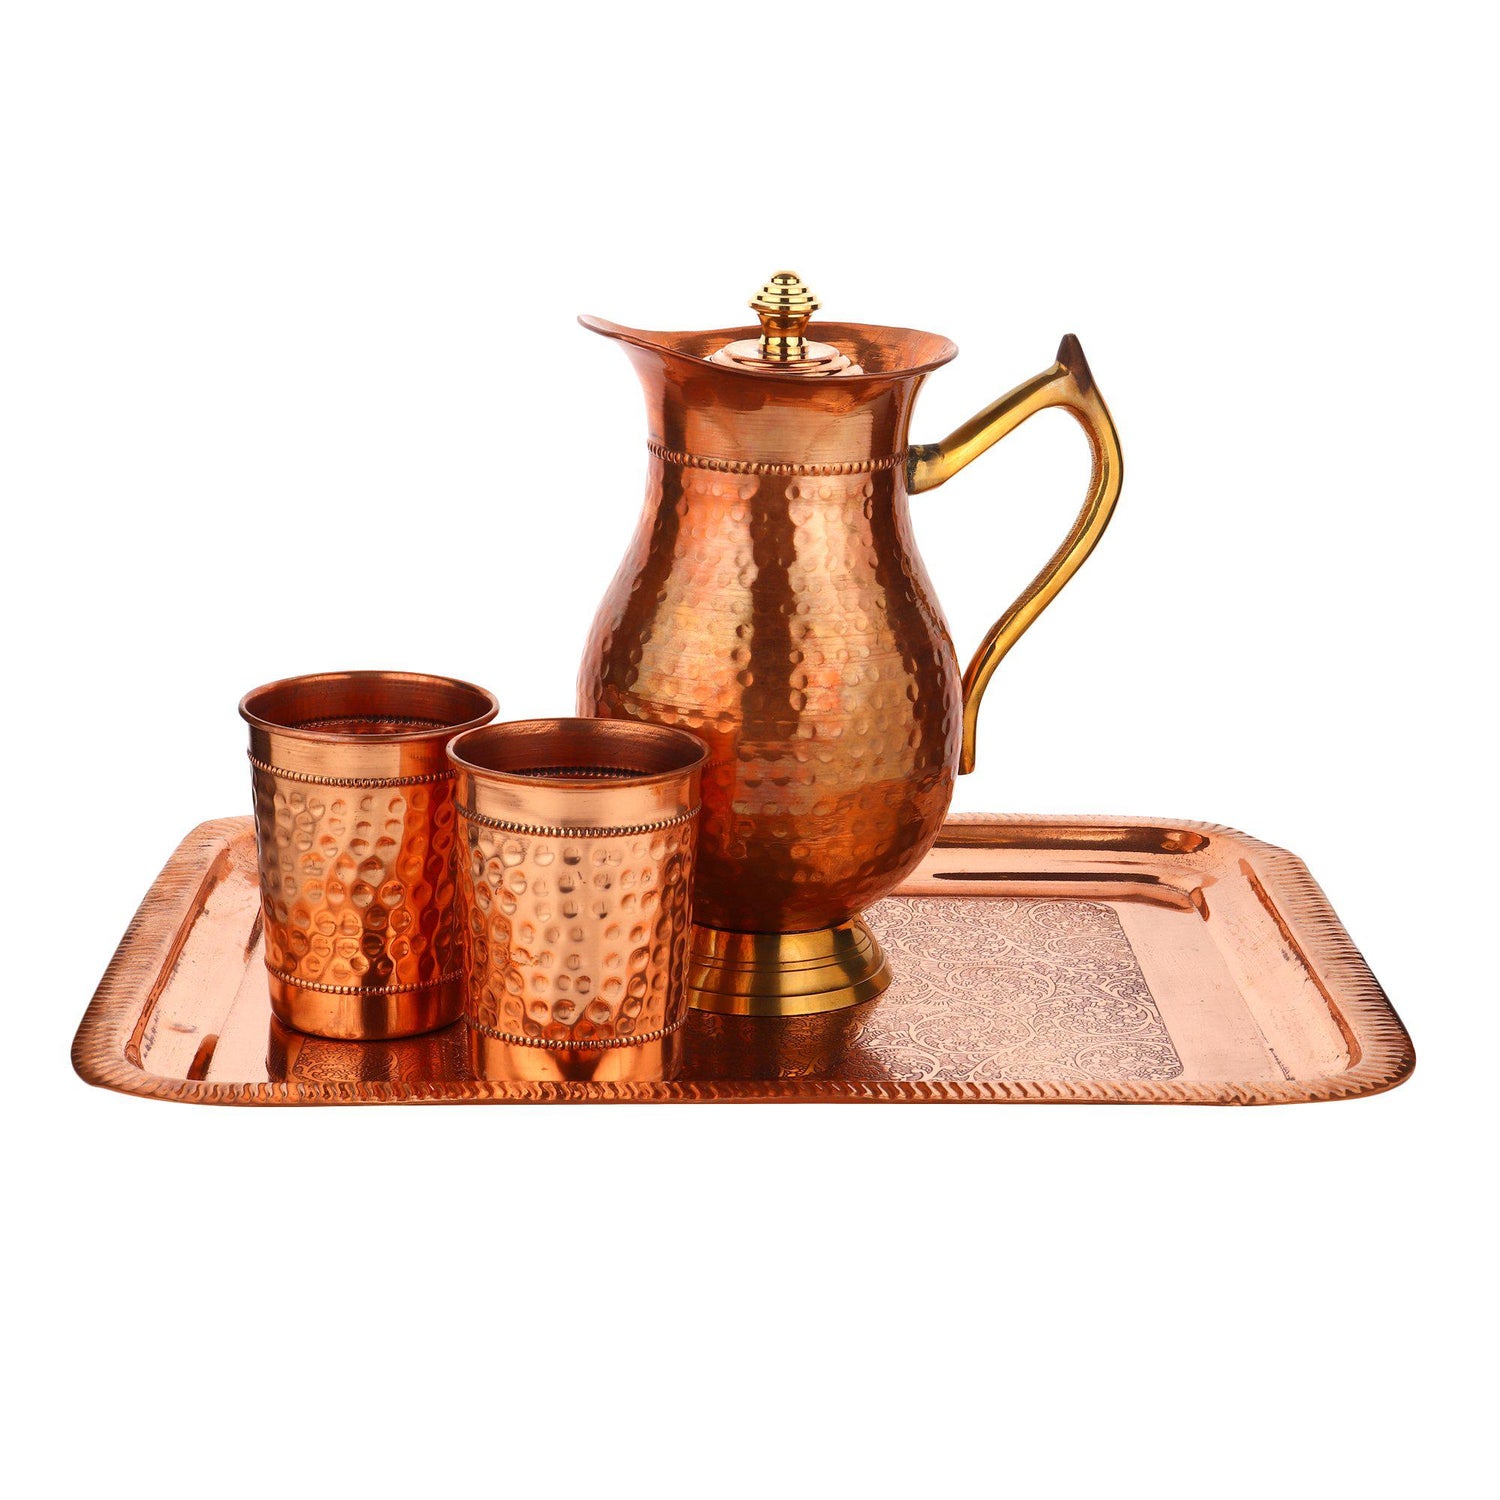 Hammered Design Copper Jug & Glass With Tray-Copper Jug & Glass With Tray-ONESKYSHOP